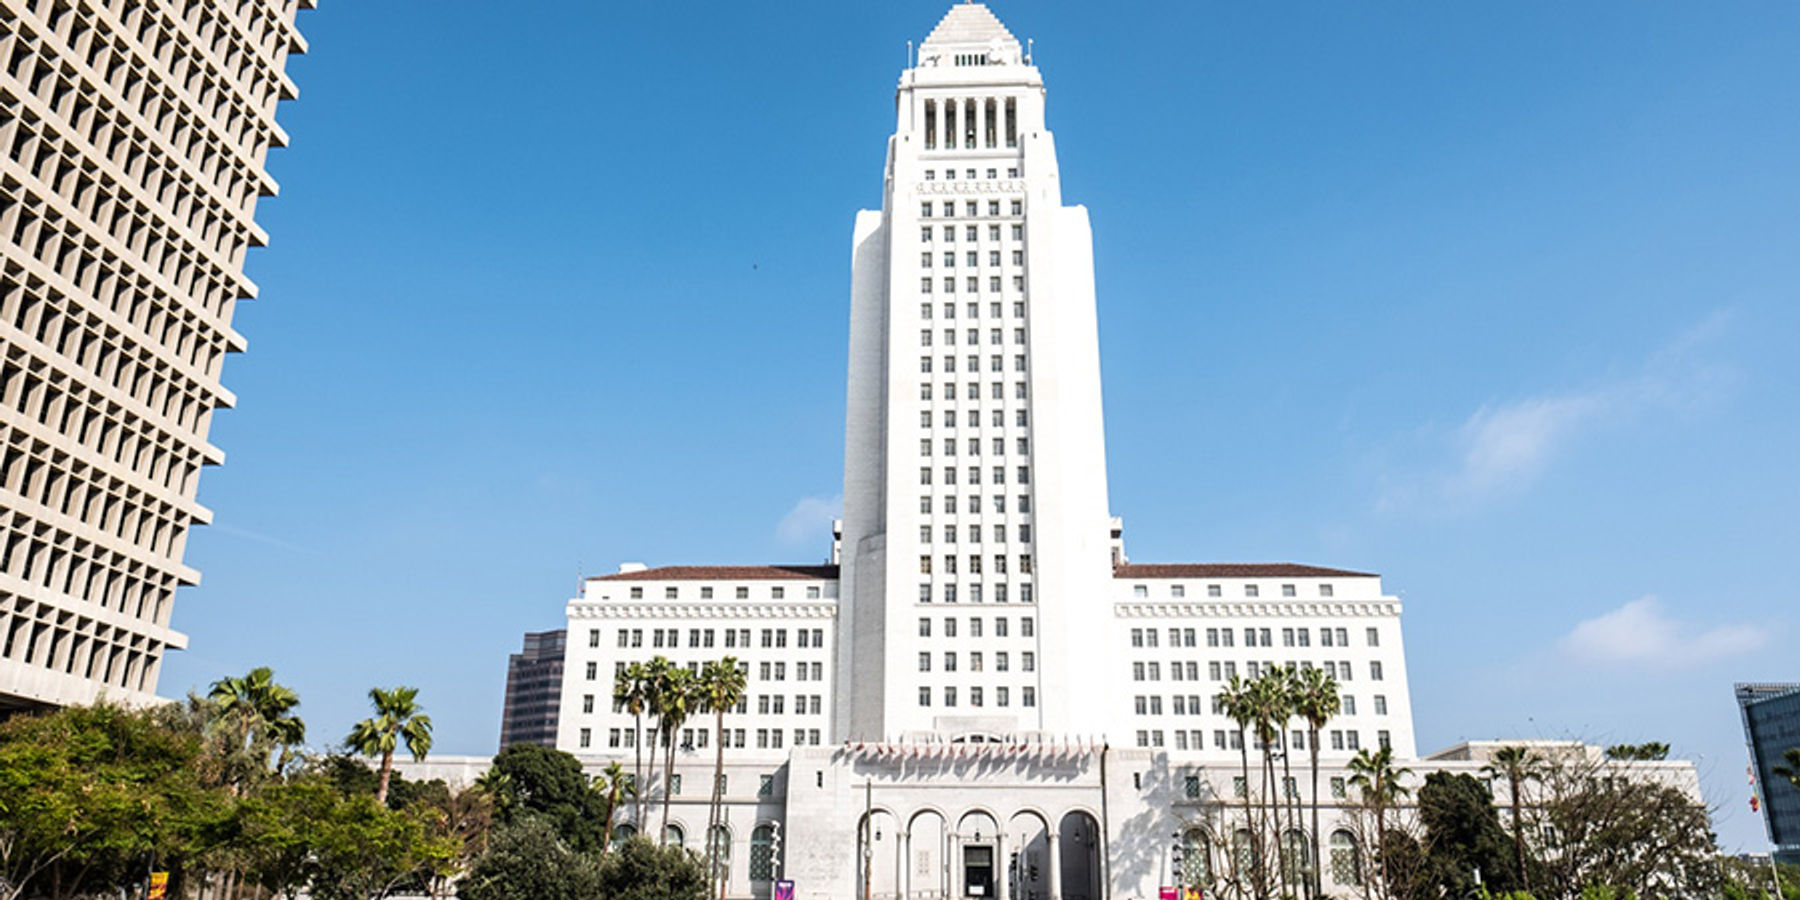 Los Angeles City Hall in Downtown Los Angeles - Tours and Activities